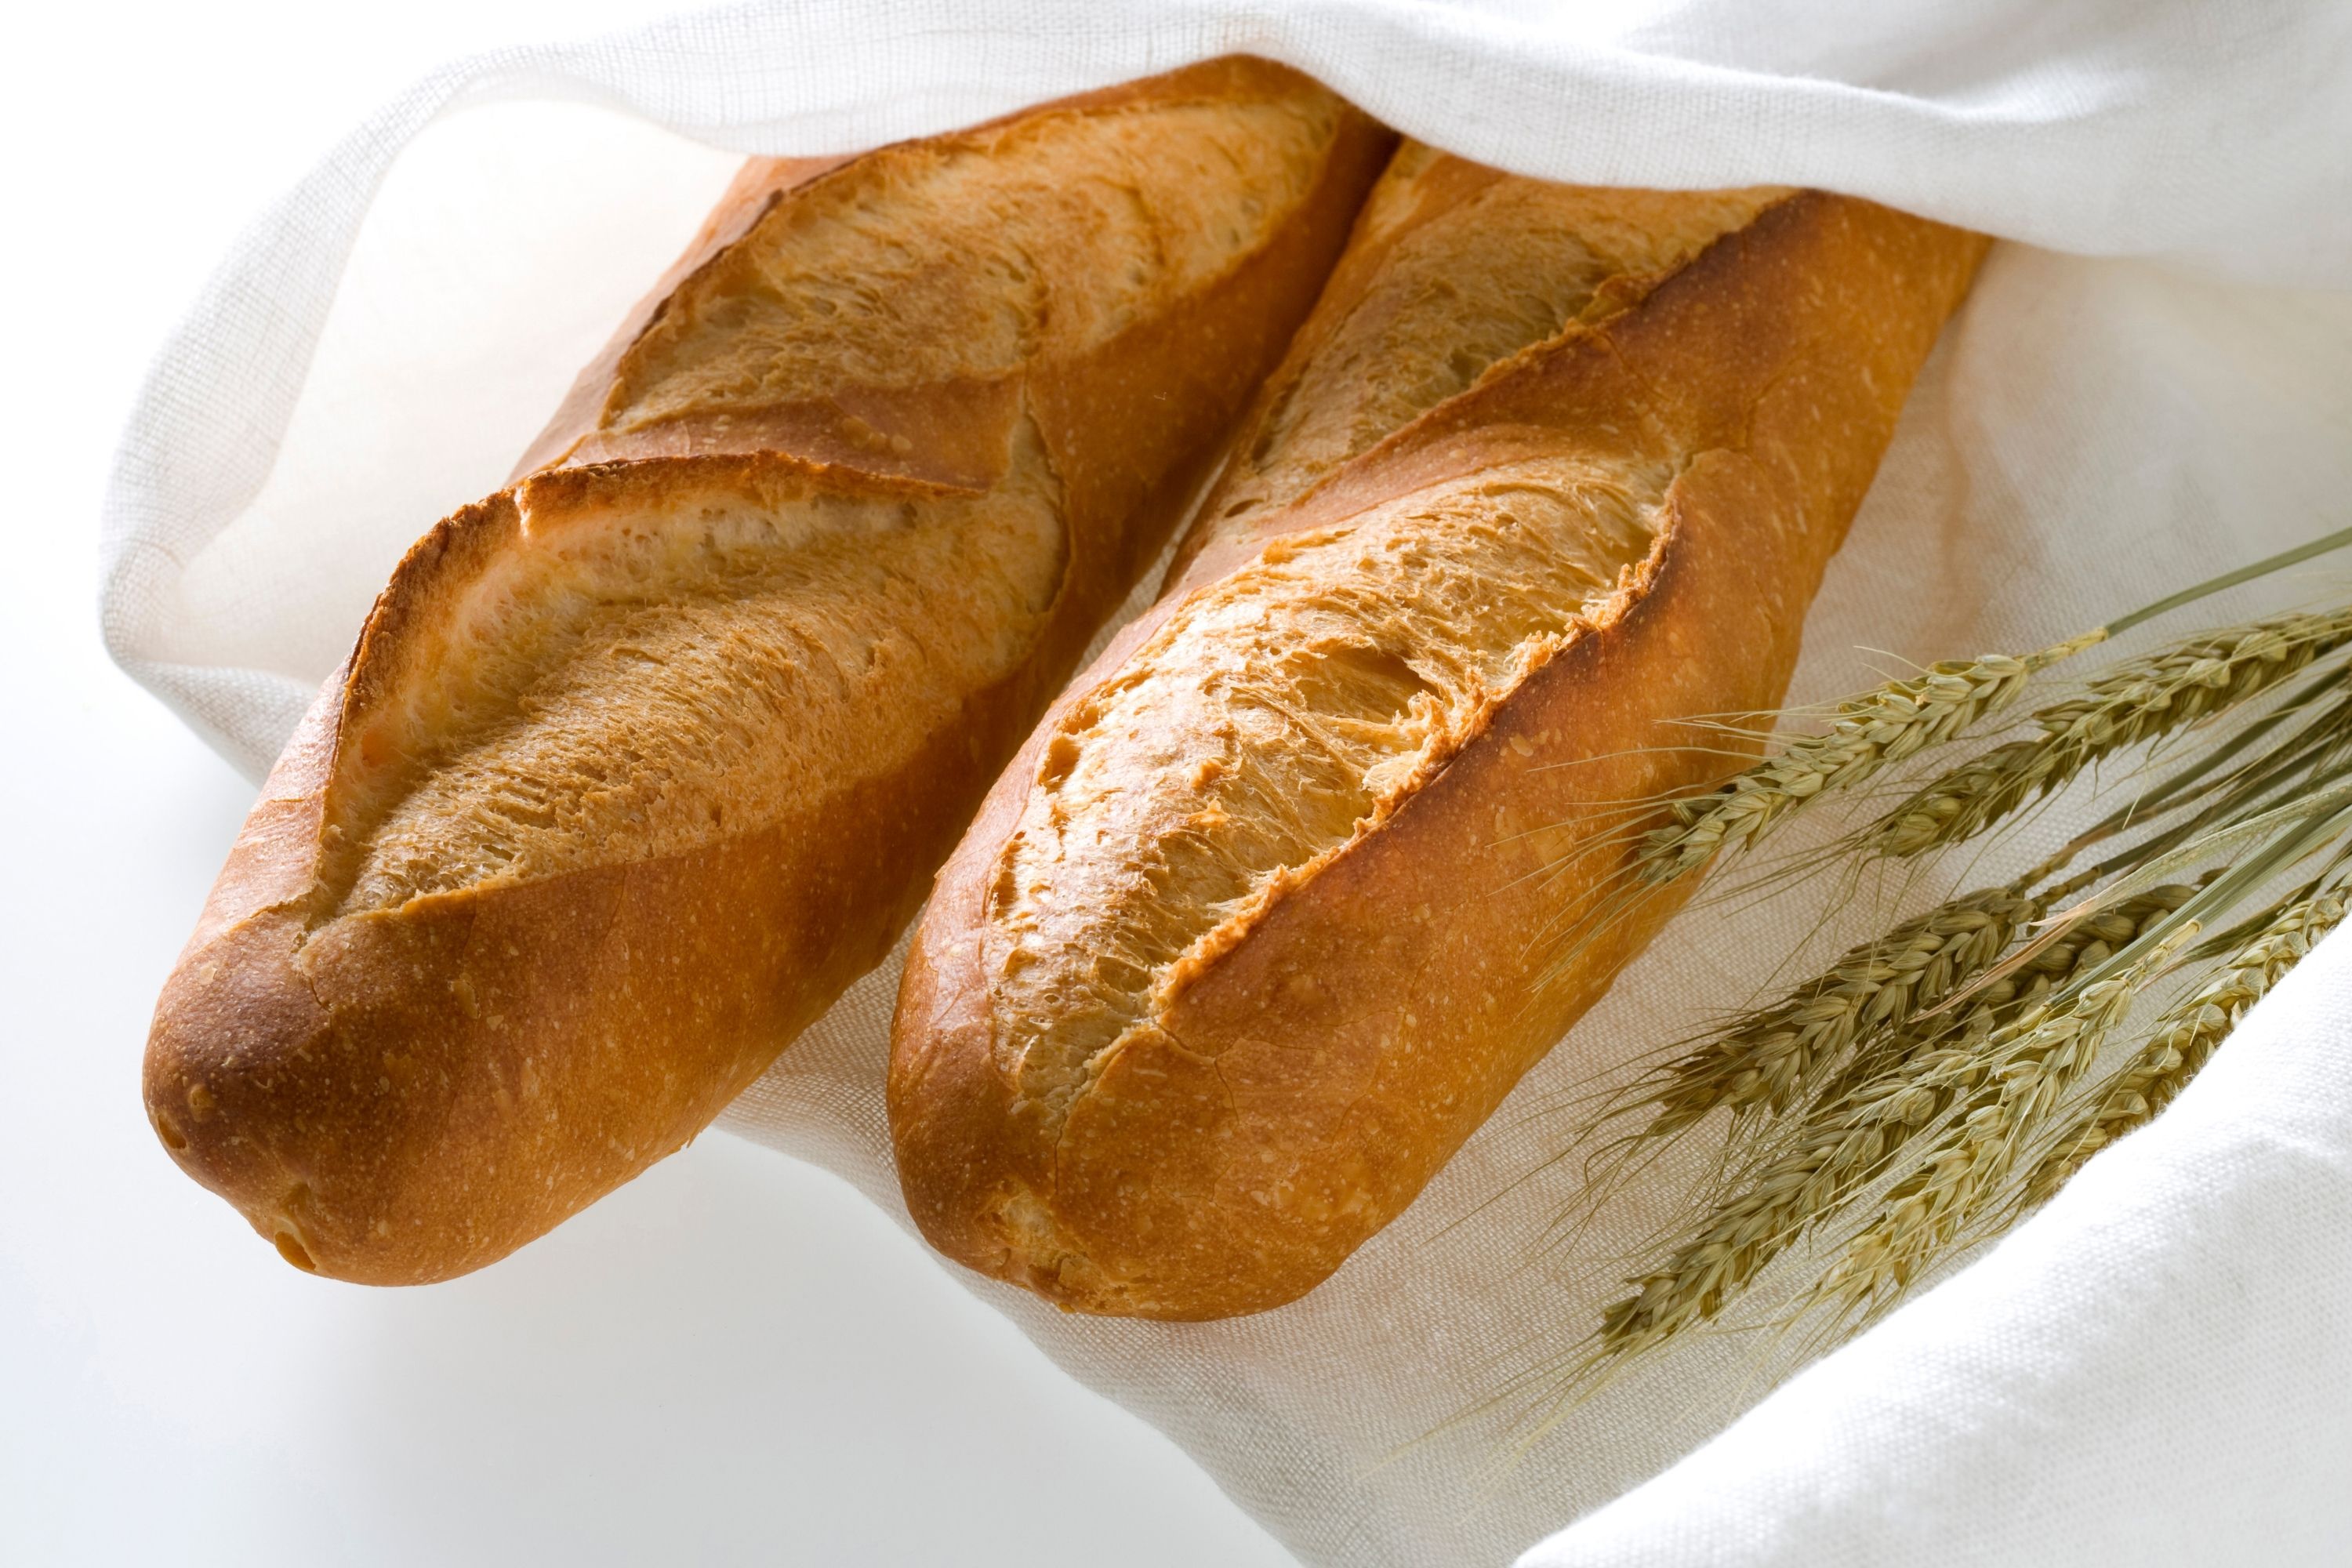 How to Warm Up French Bread In a Microwave